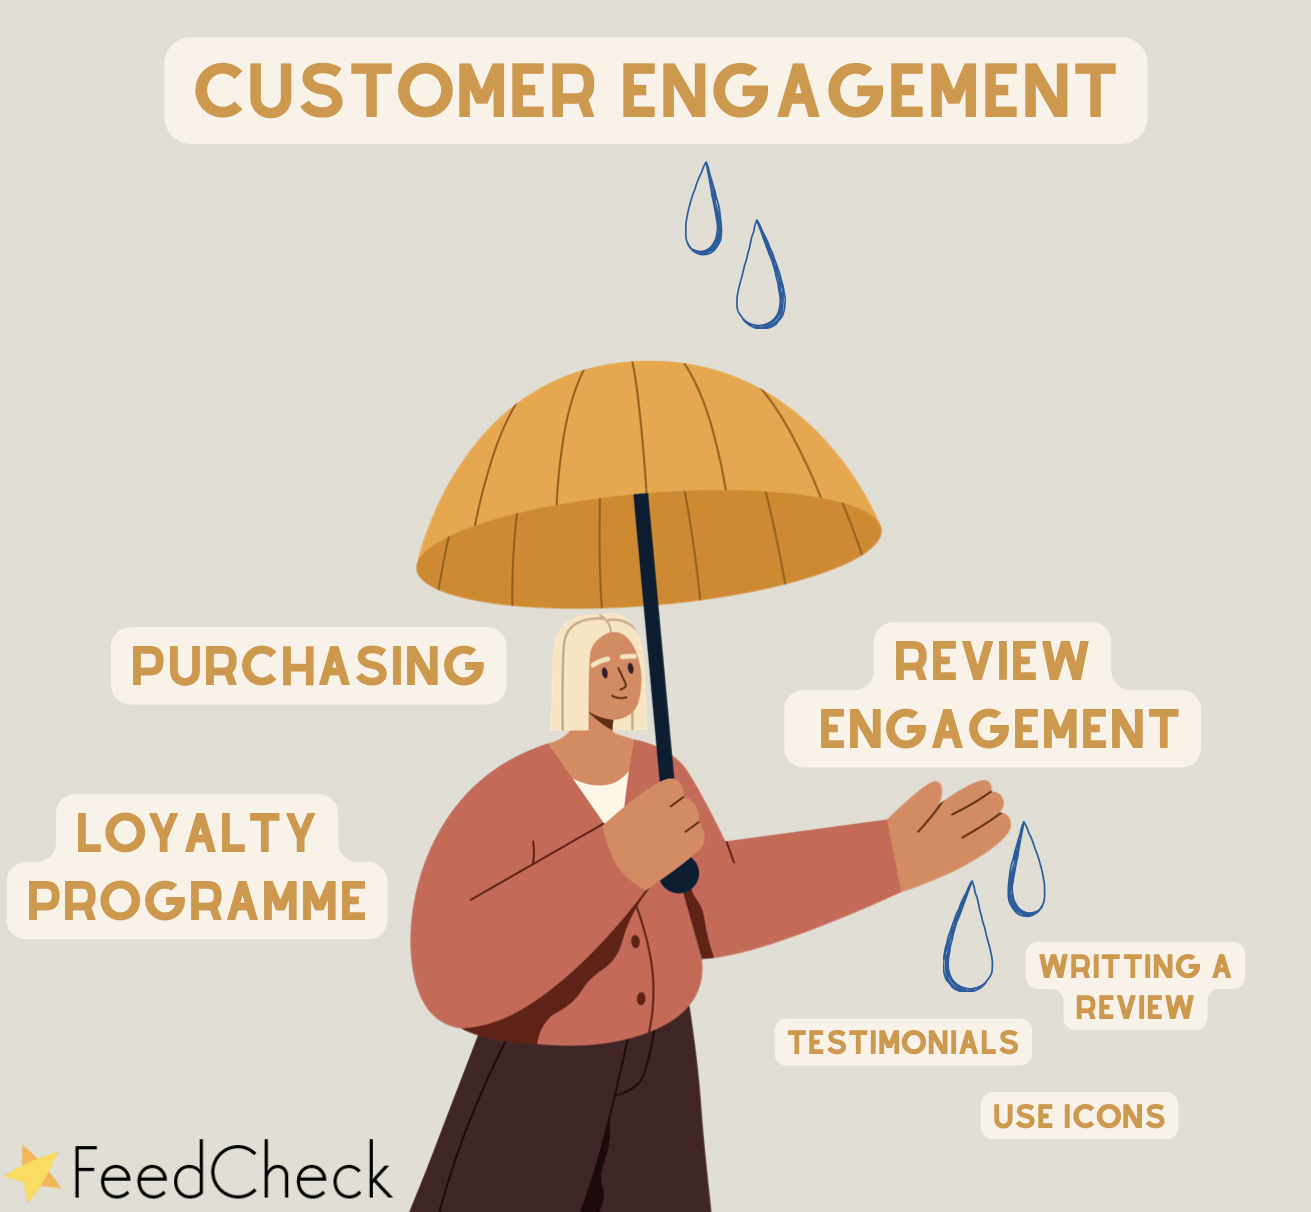 Your business and sales are impacted by review engagement